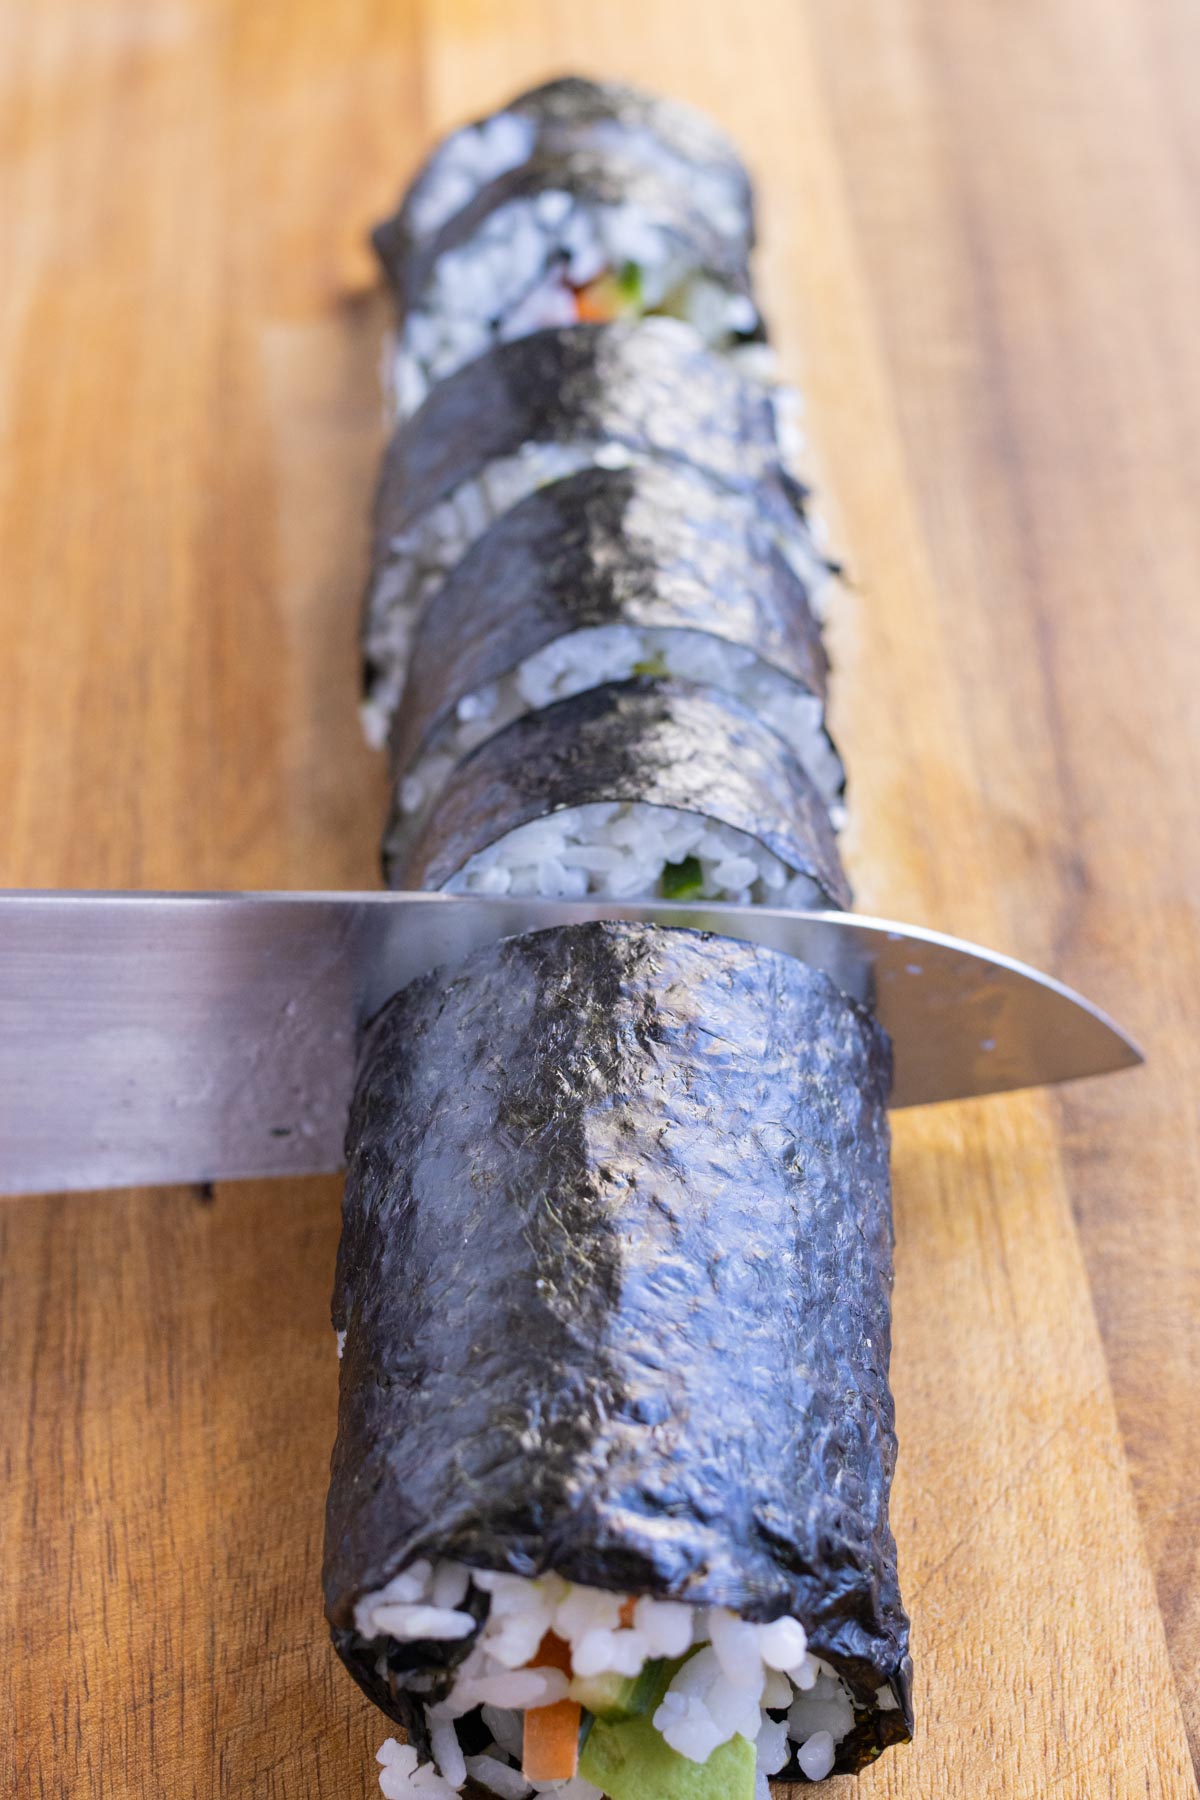 A sharp knife is used to cut the Avocado roll.